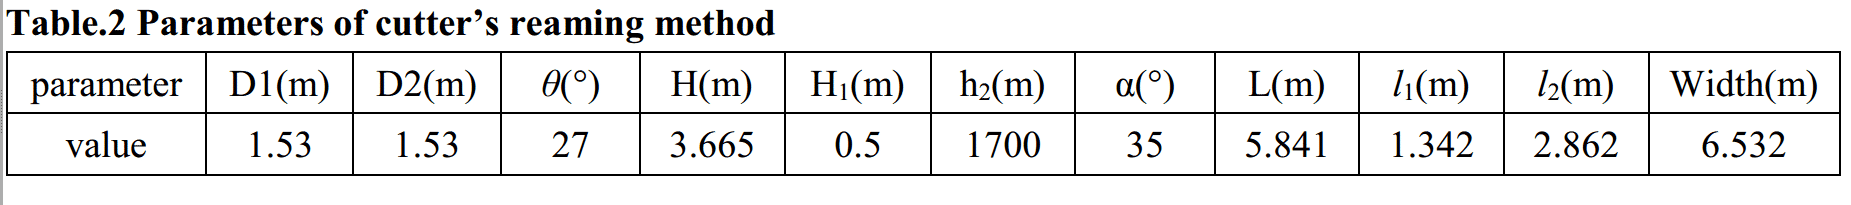 Table.2 Parameters of cutter’s reaming method